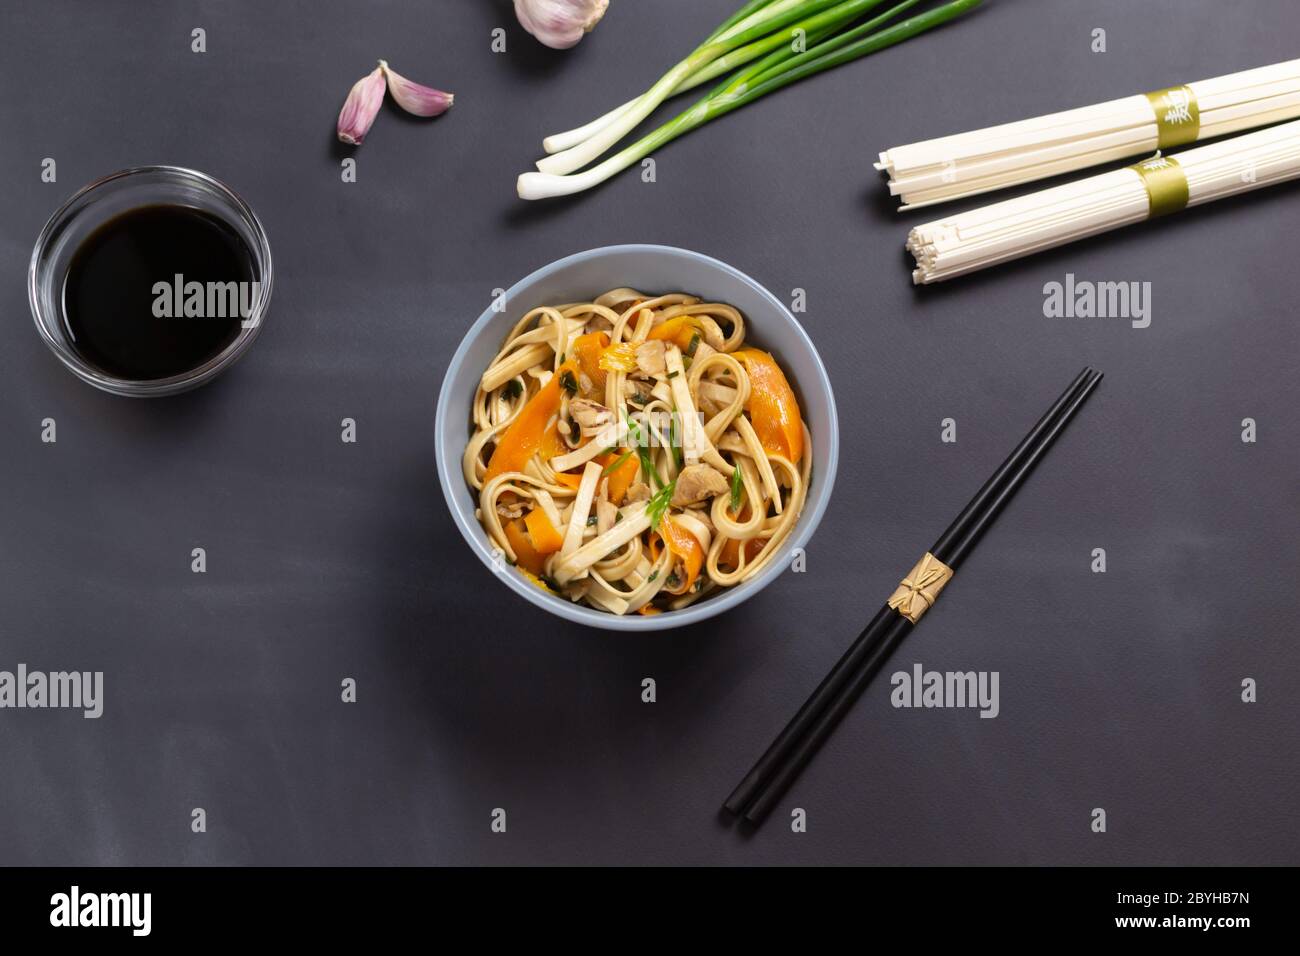 Udon noodles with chicken, soy sauce, bamboo sticks and fresh ingredients on a black background. Japanese cuisine. Stock Photo